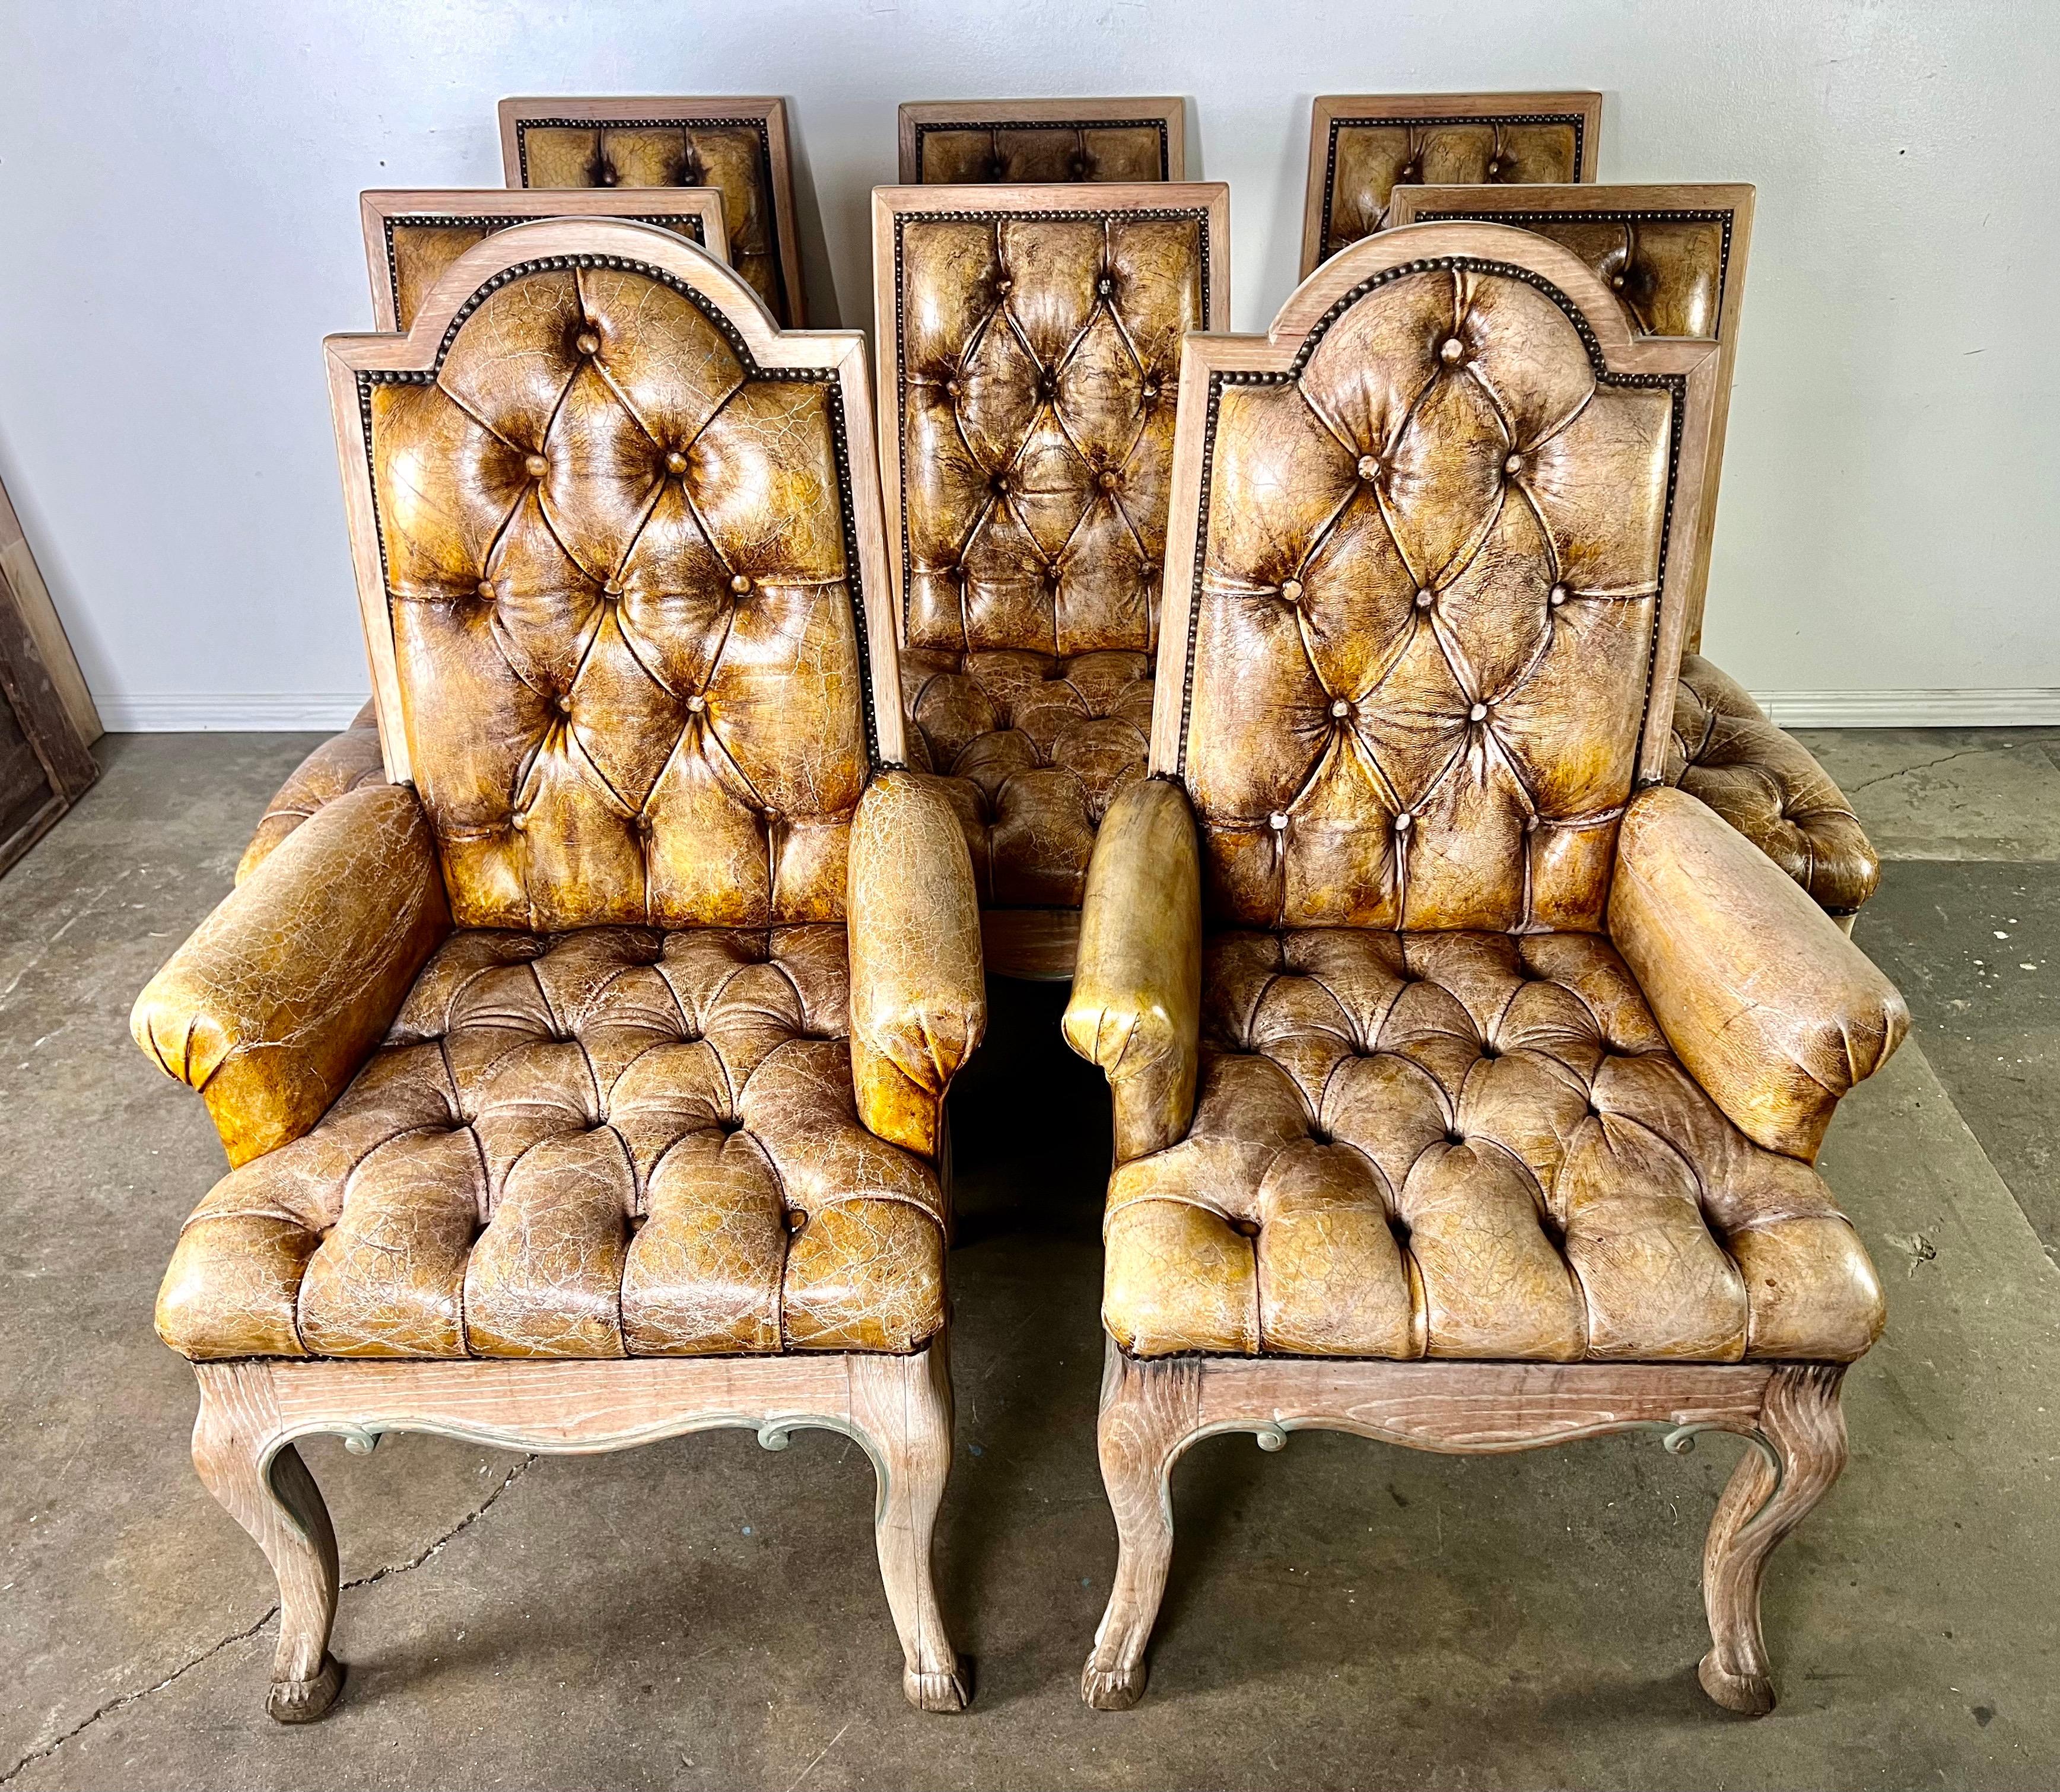 Set of eight French Provincial style dining chairs, featuring two armchairs and six side chairs upholstered in distressed tufted leather with nailhead trim detail.  The chairs stand on elegant cabriole legs with hoofed feet.

Armchair size-26